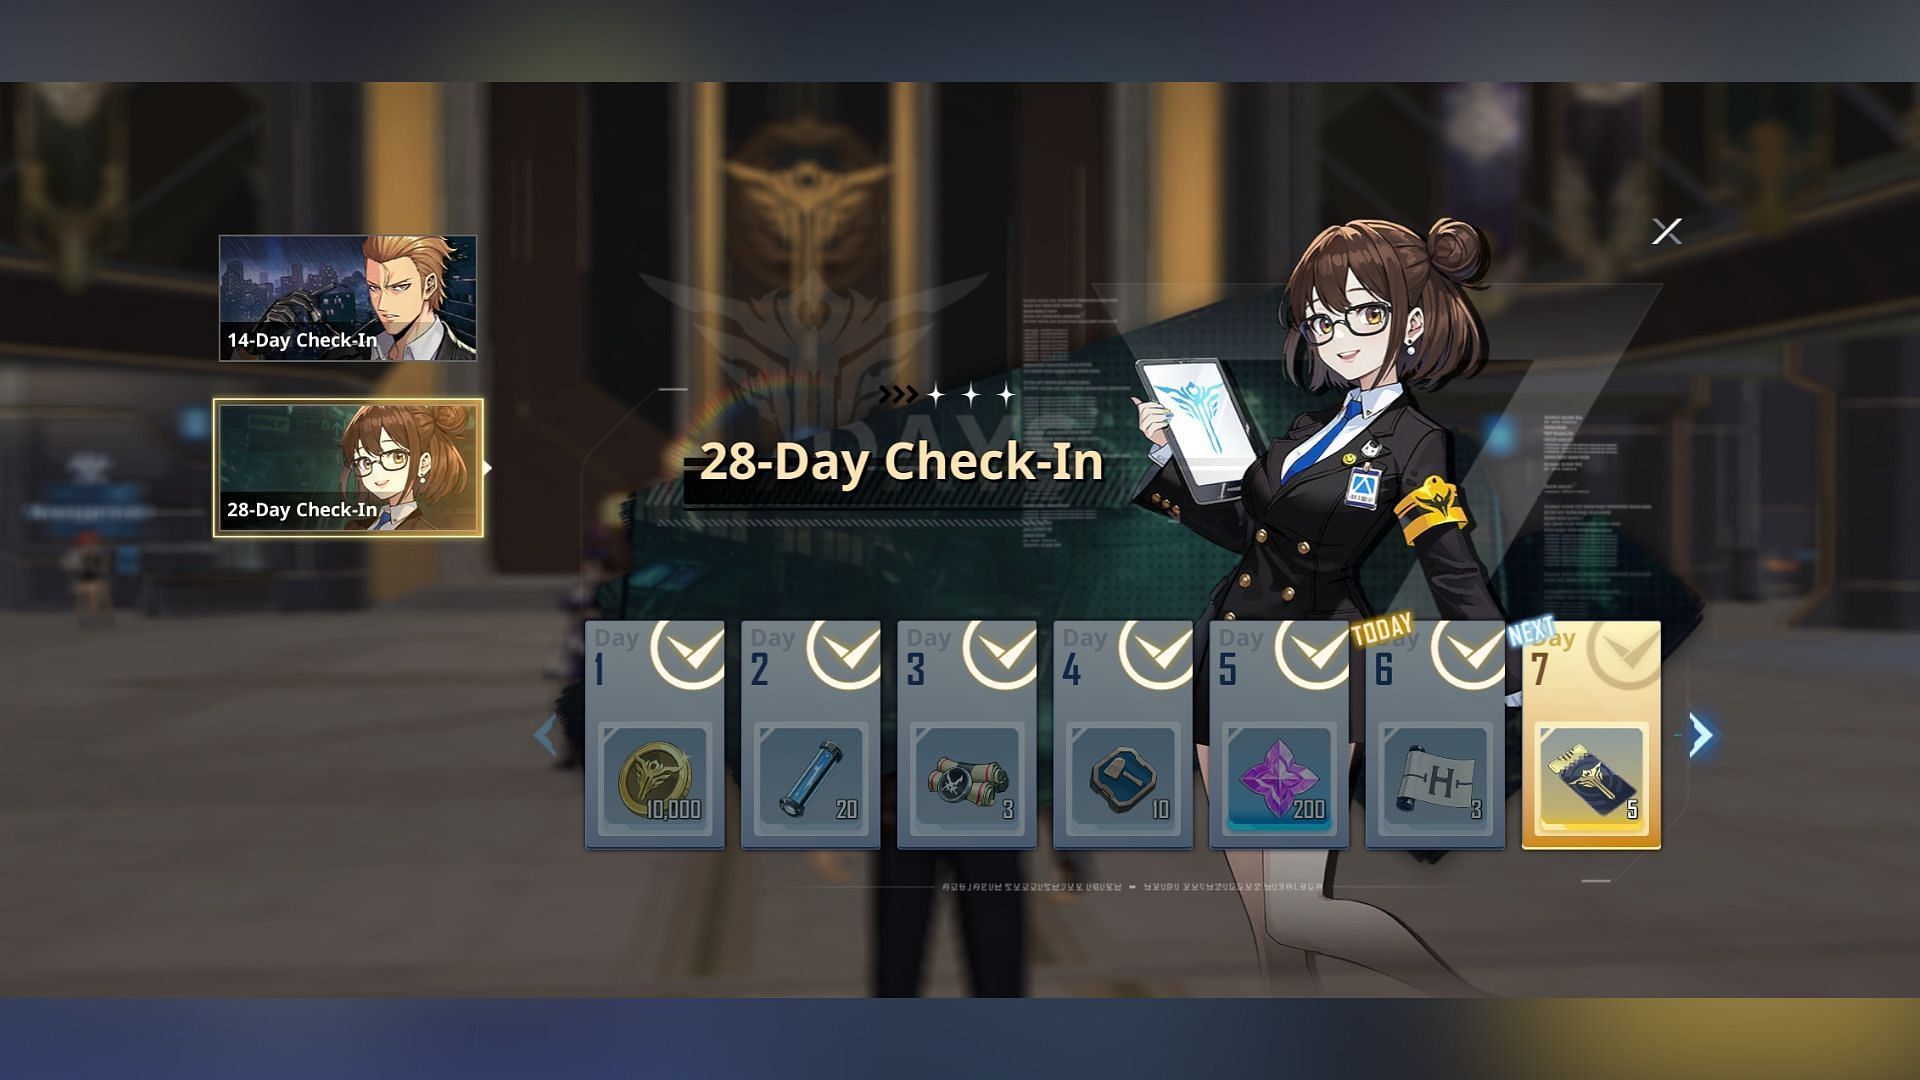 Daily check-in events are among the best sources for obtaining Draw Tickets in Solo Leveling: Arise (Image via Netmarble)